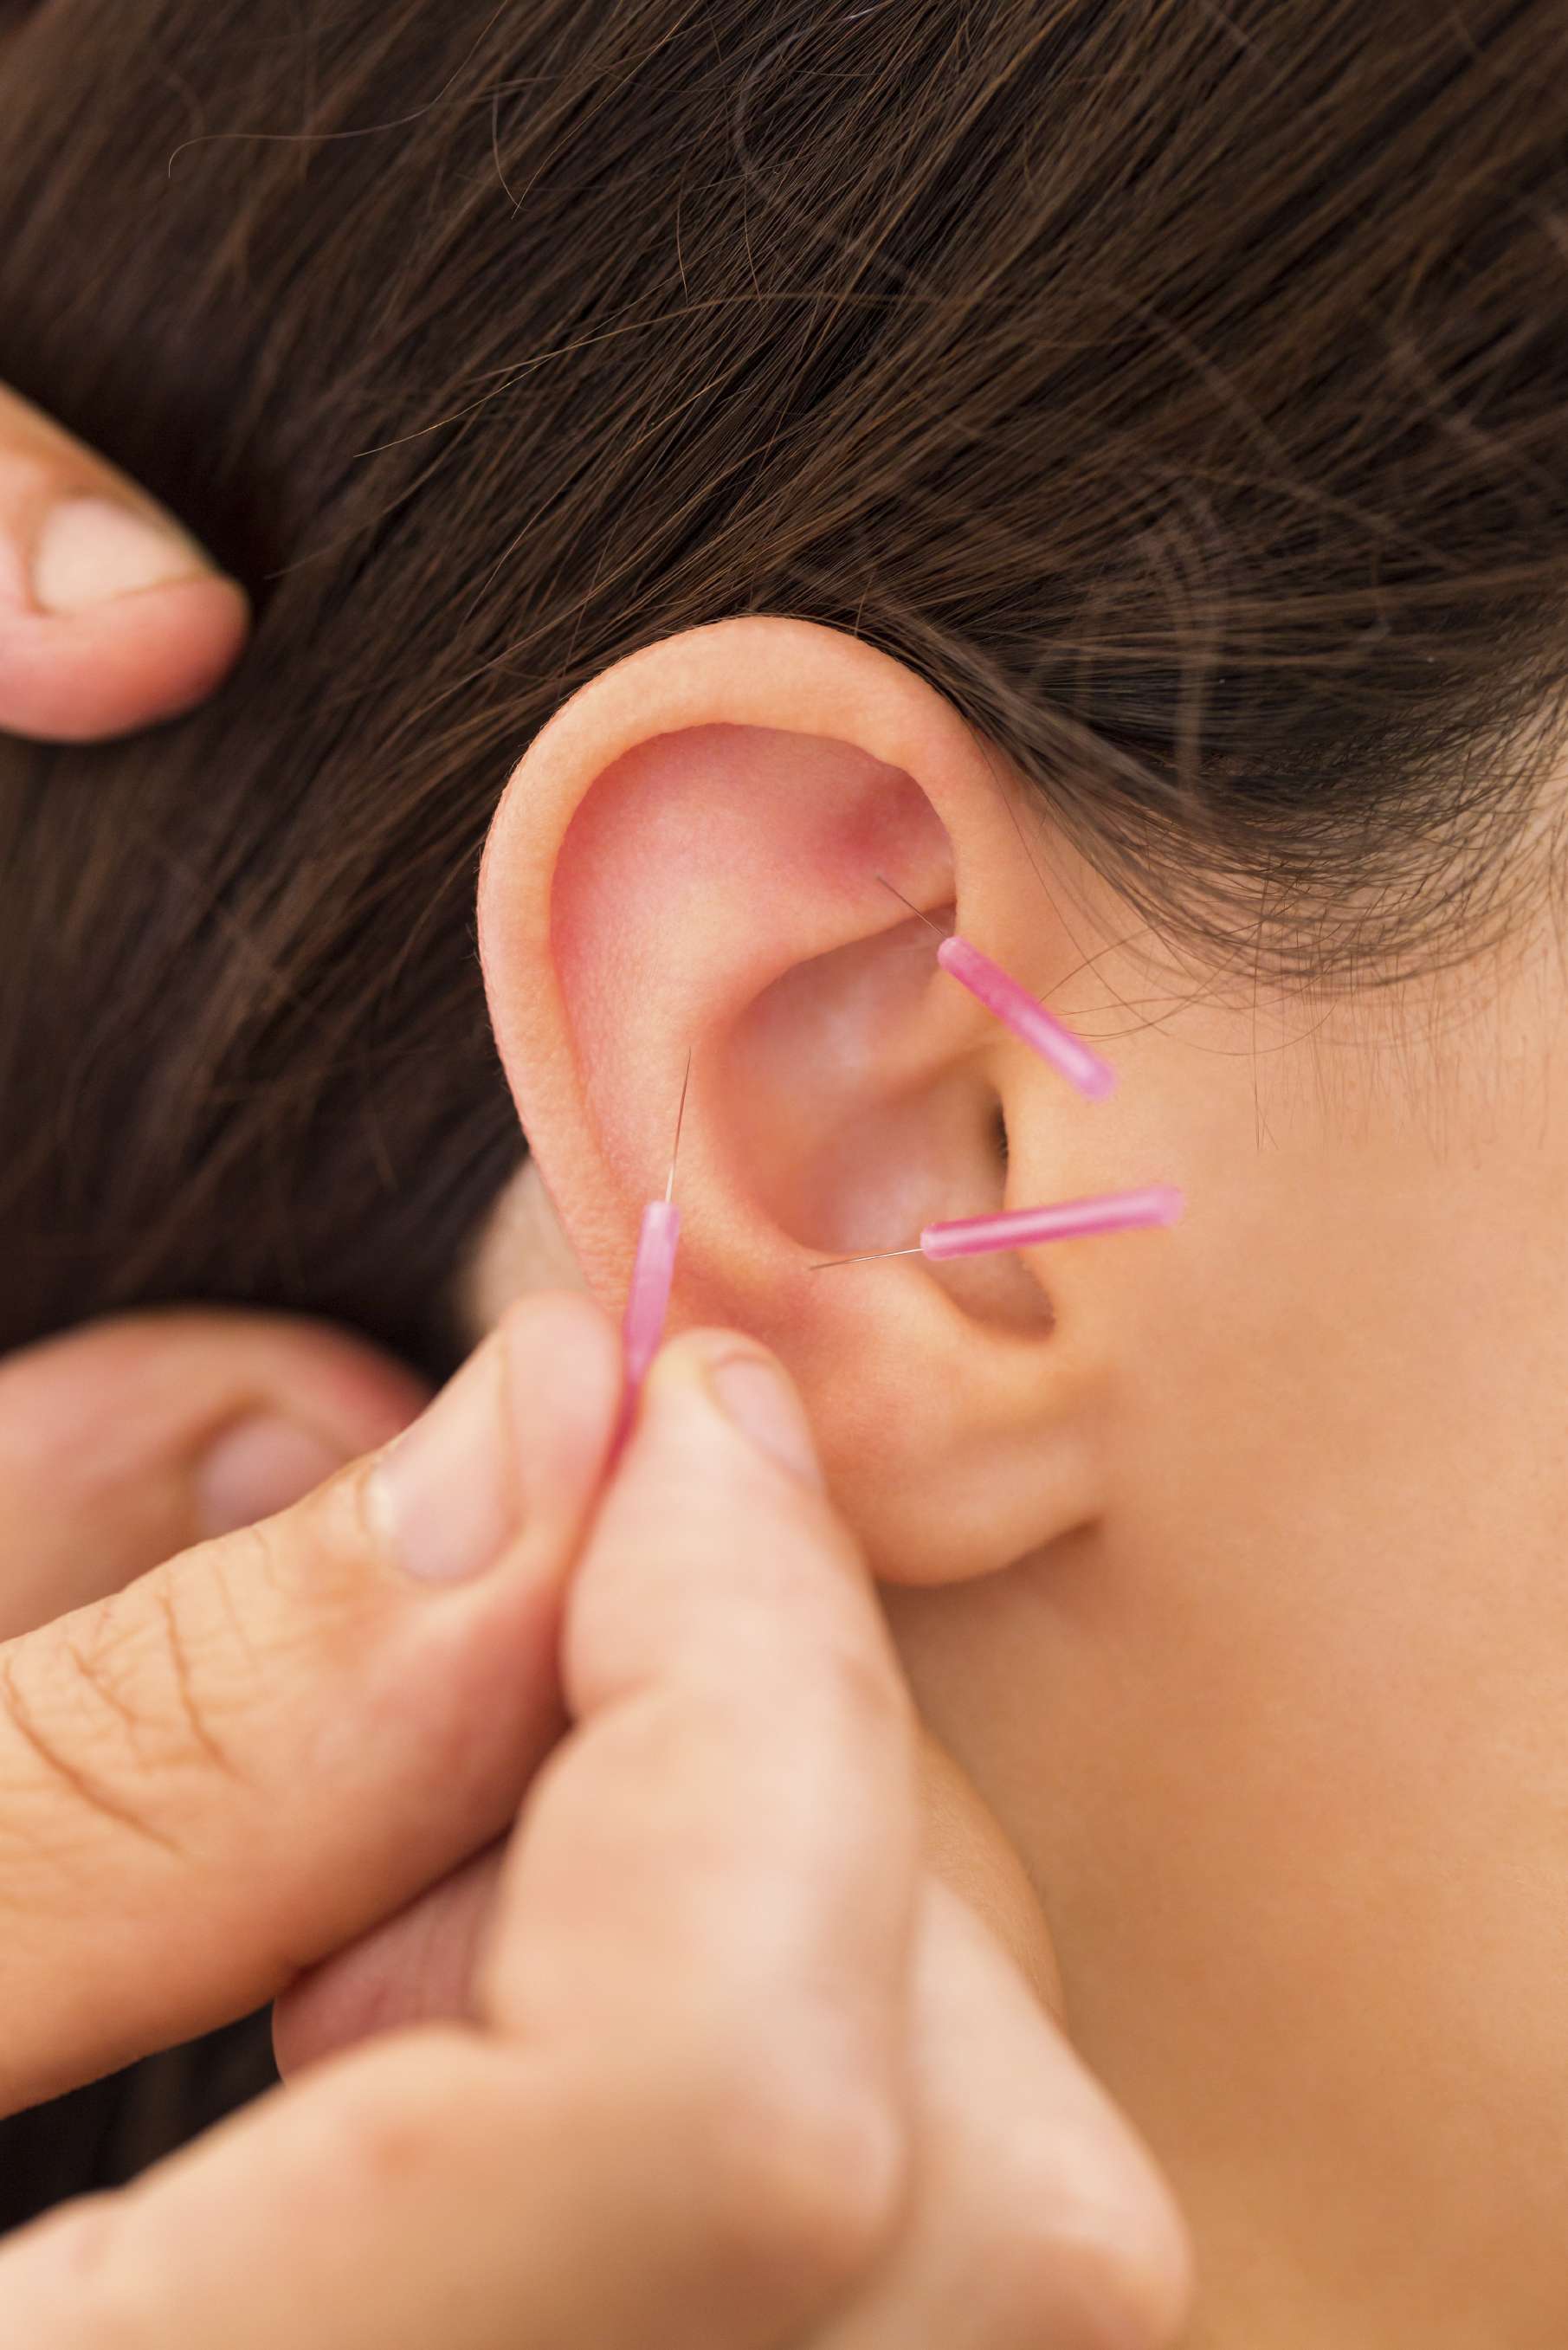 Acupuncture to different parts of the ear for pain management - Janet Lee